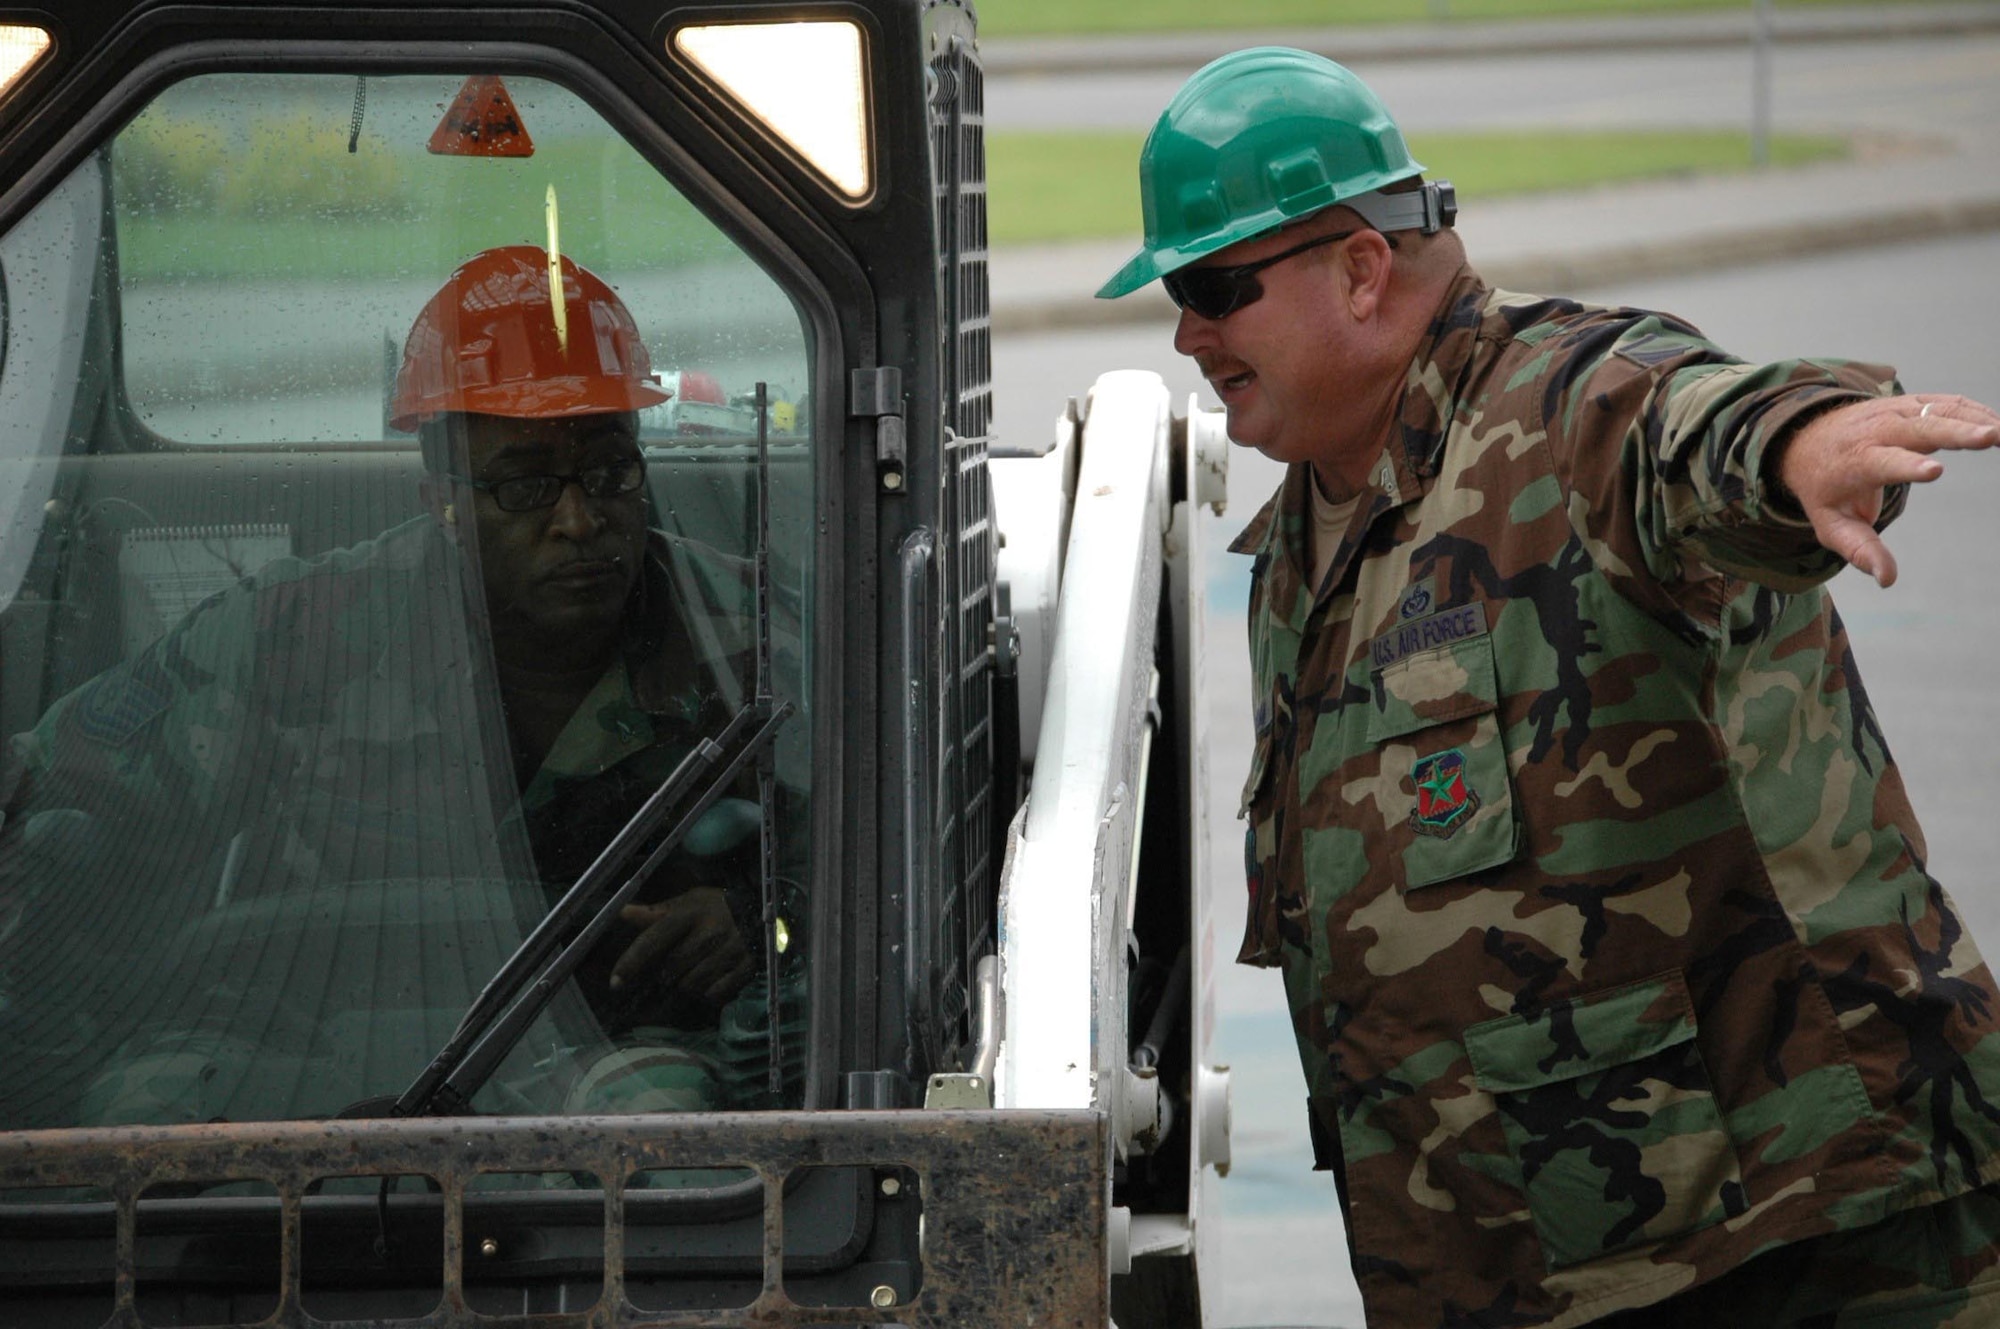 Master Sgt. Tim "Bull" Durham (right) provides guidance to Technical Sgt. Rodney Blanton as Sergeant Blanton prepares to drive a Bobcat on site in Moose Jaw. (Texas National Guard photo/Senior Master Sgt. Marcus Falleaf)